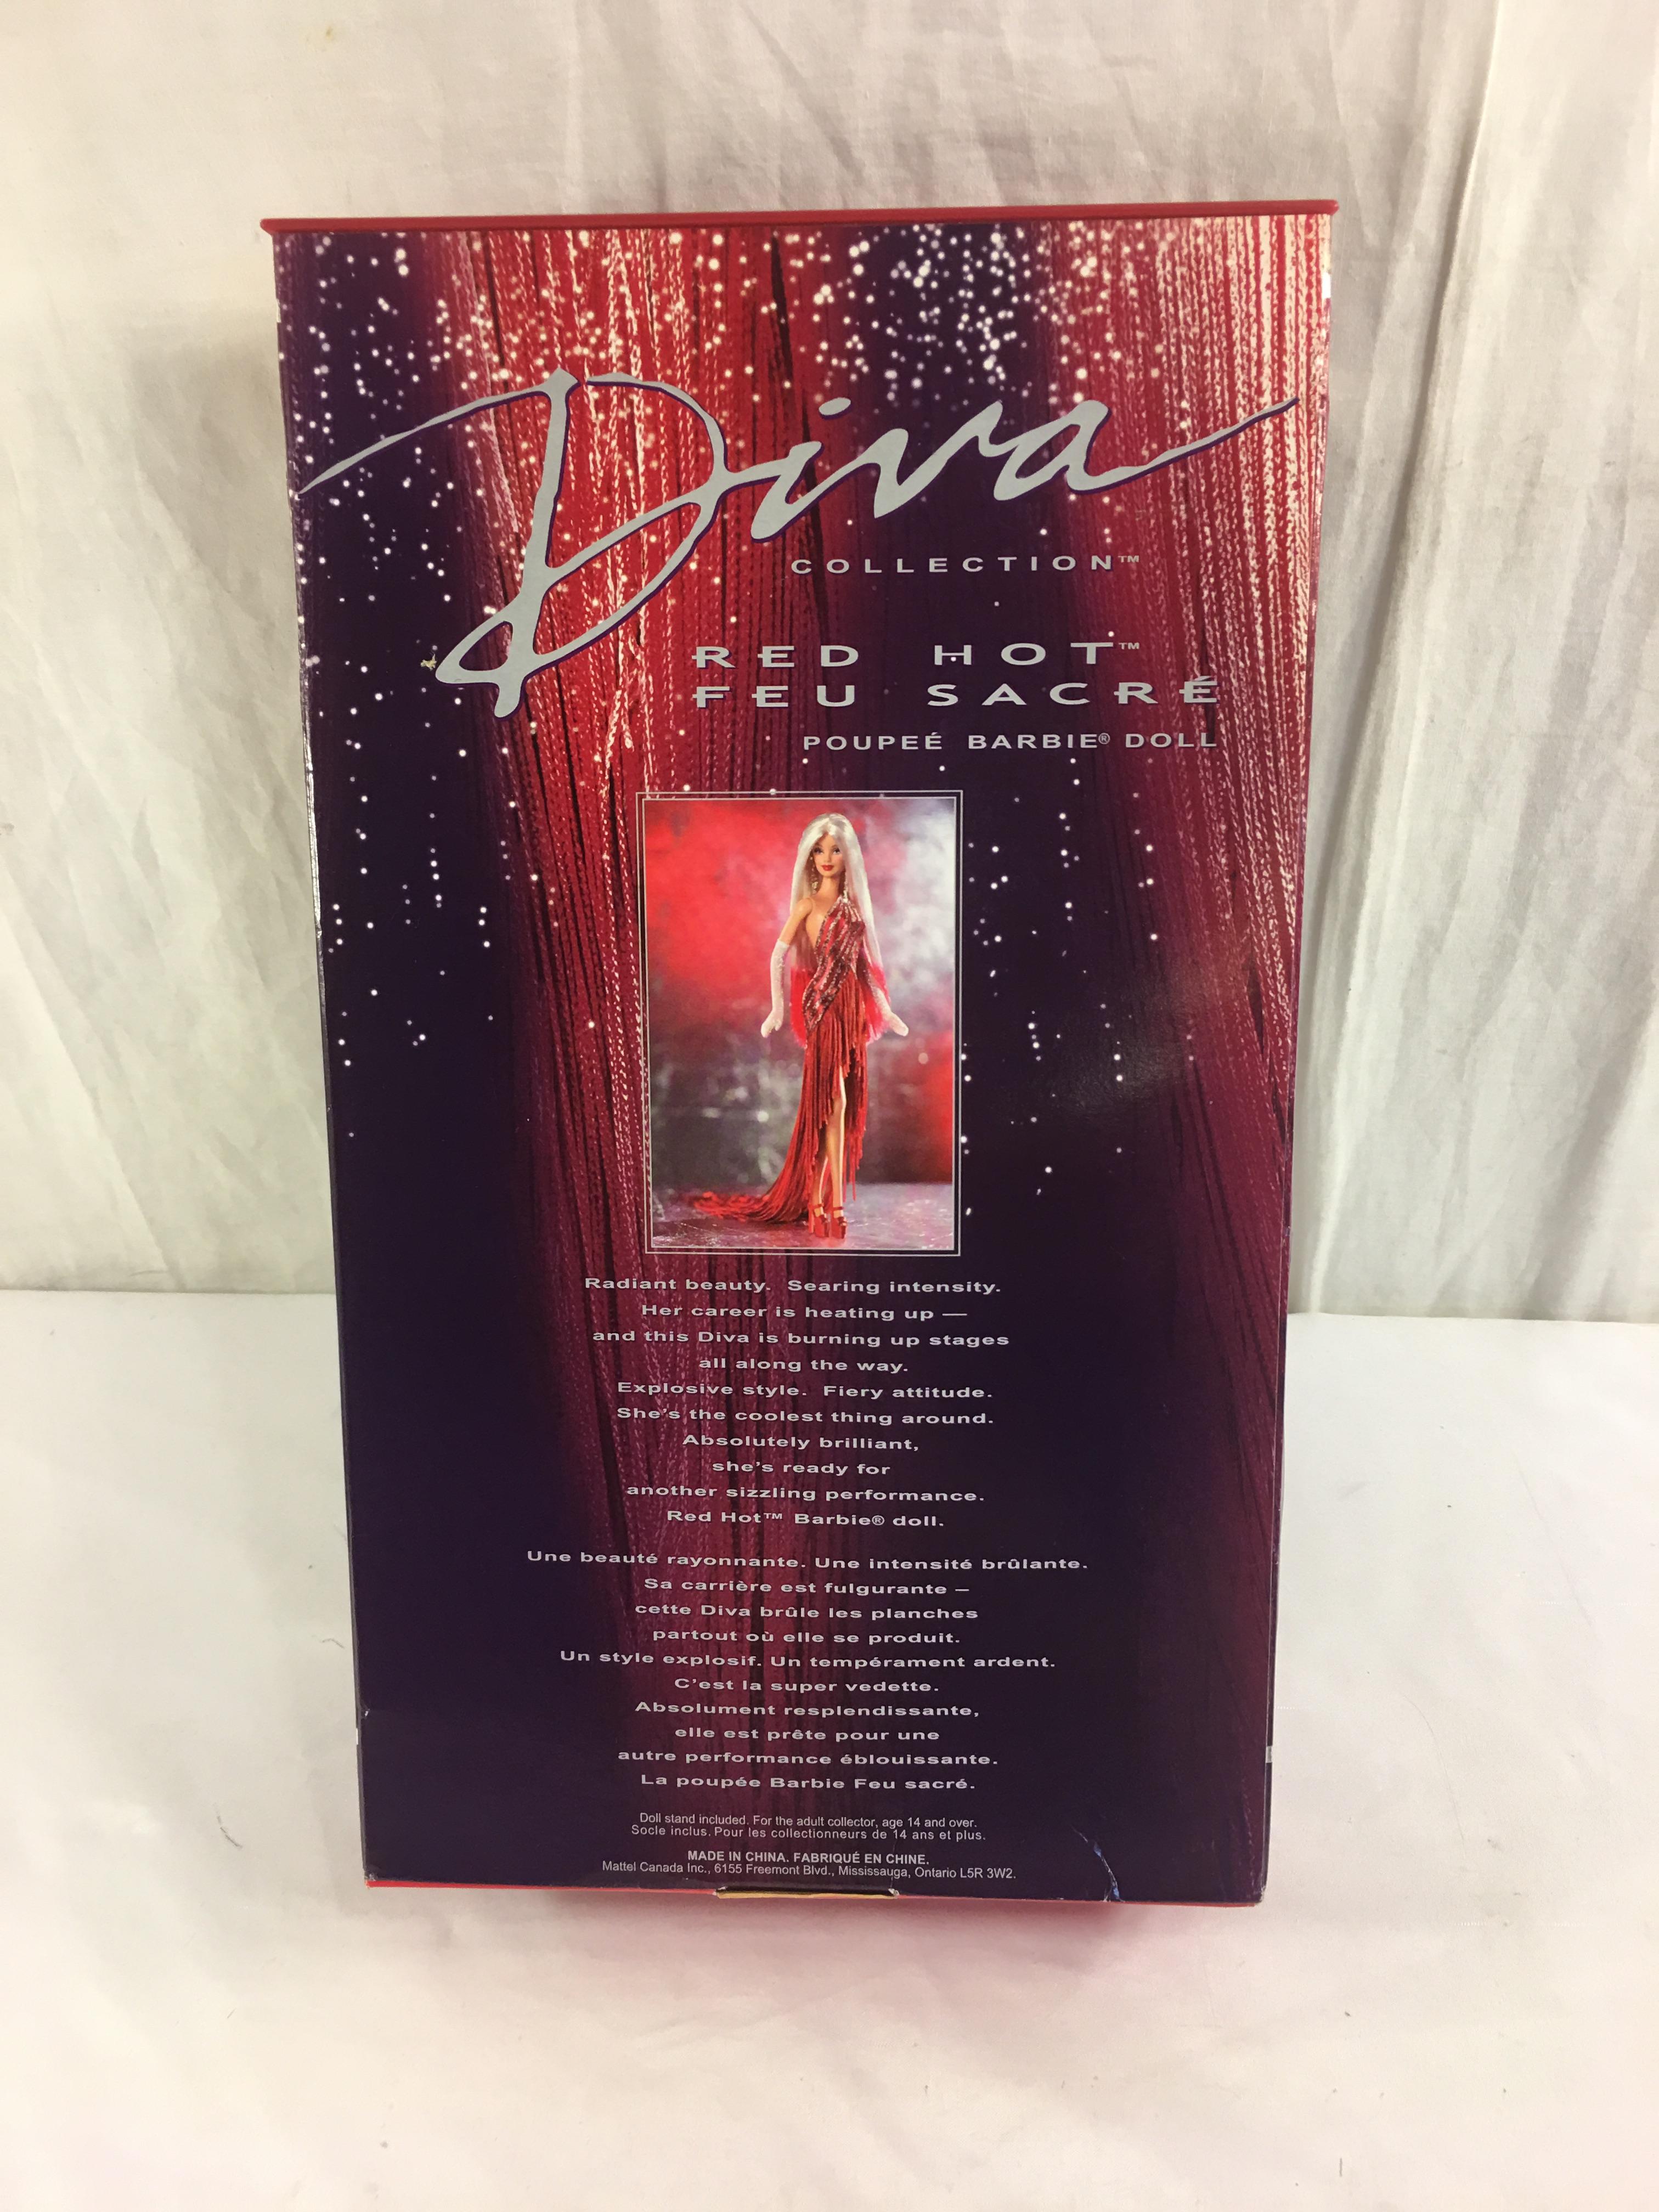 NIB Collector Barbie Diva Red Hot Barbie Doll Edition Size: 13"tall Box